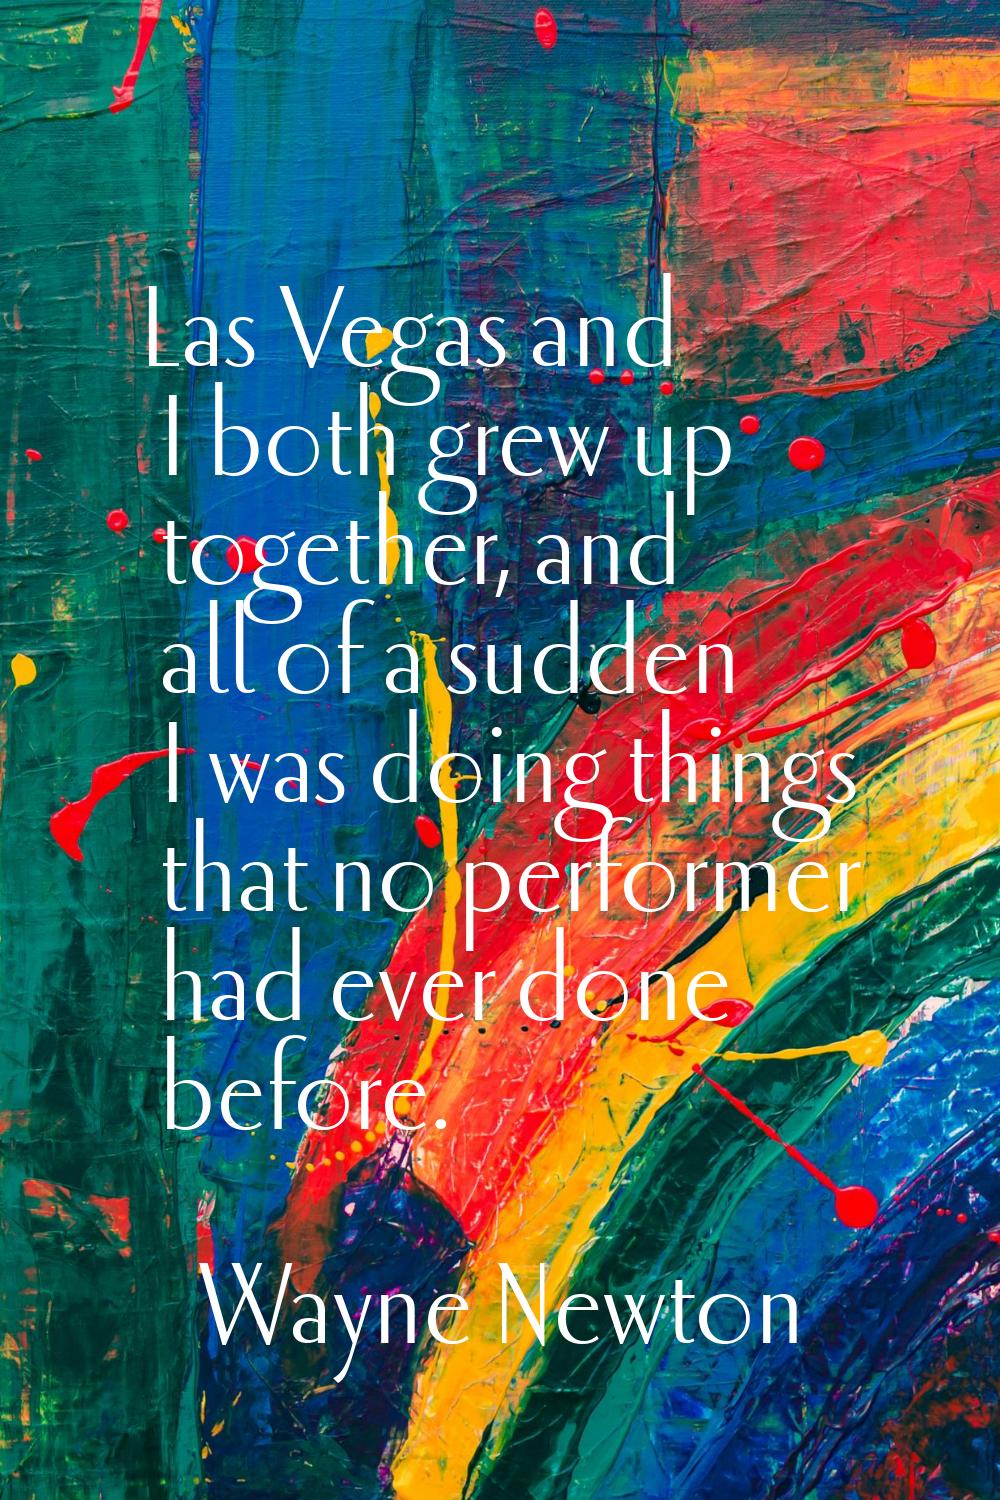 Las Vegas and I both grew up together, and all of a sudden I was doing things that no performer had